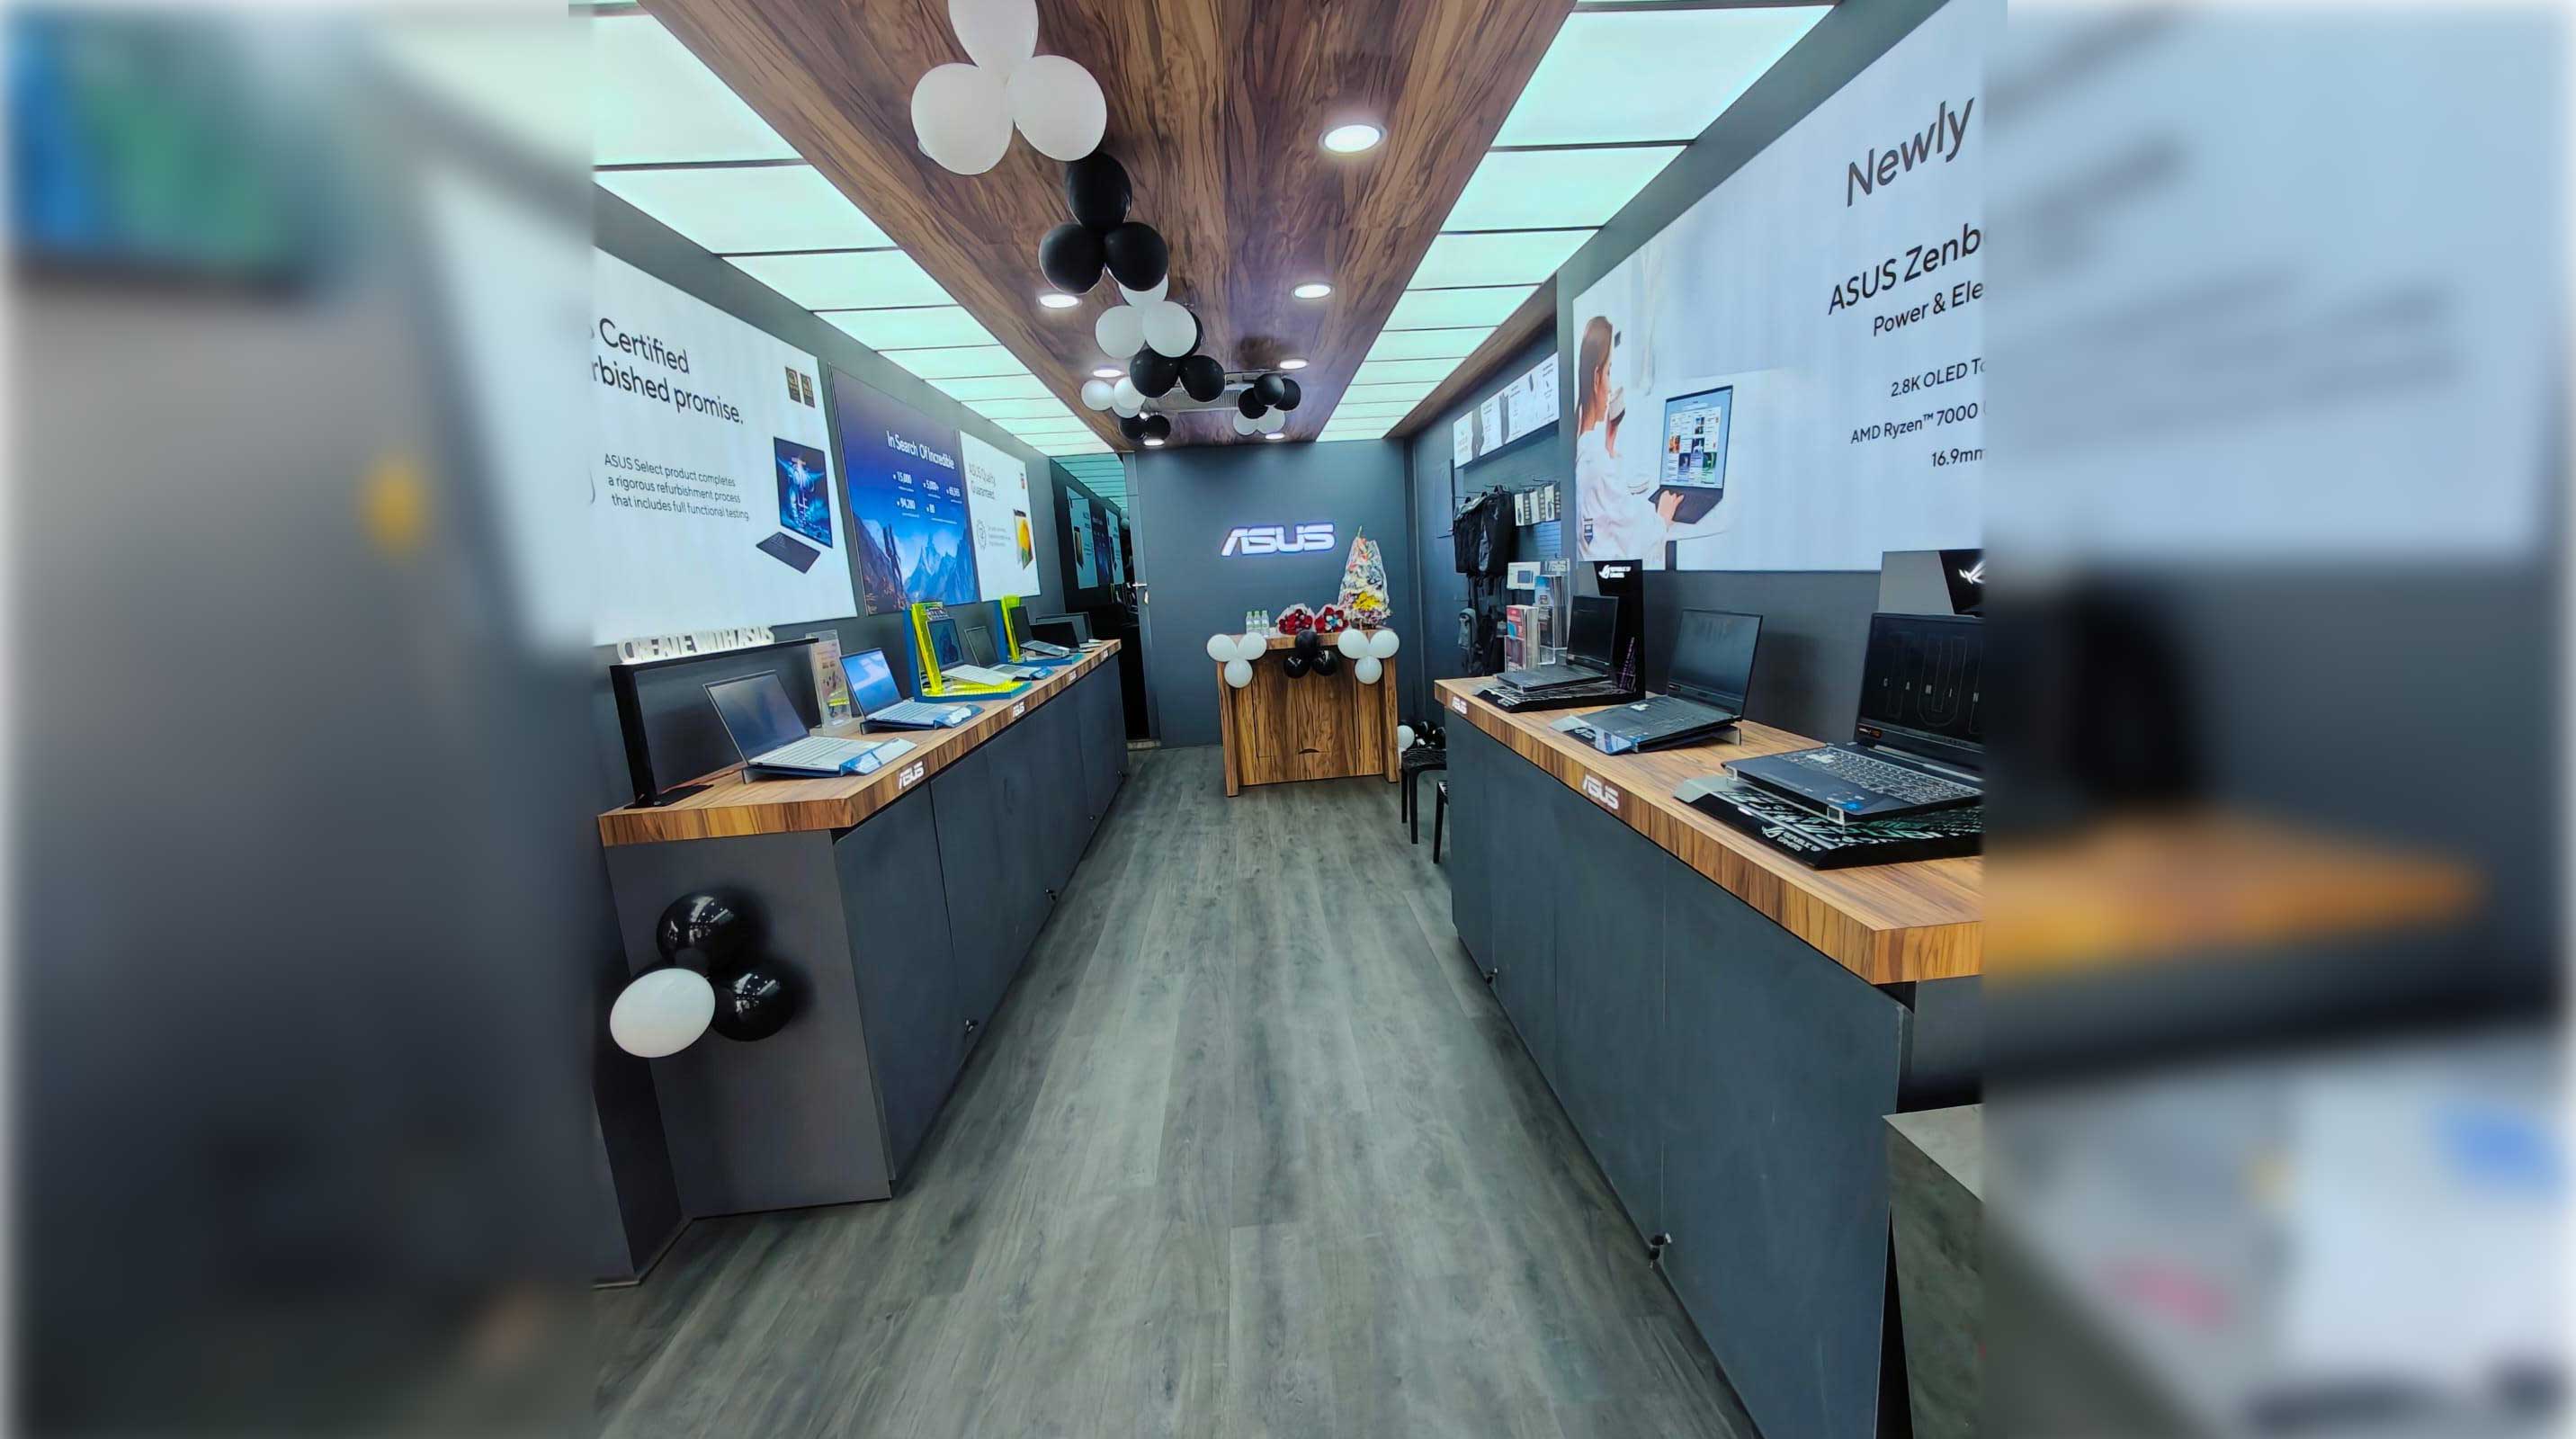 ASUS-Select-Store---Hyderabad